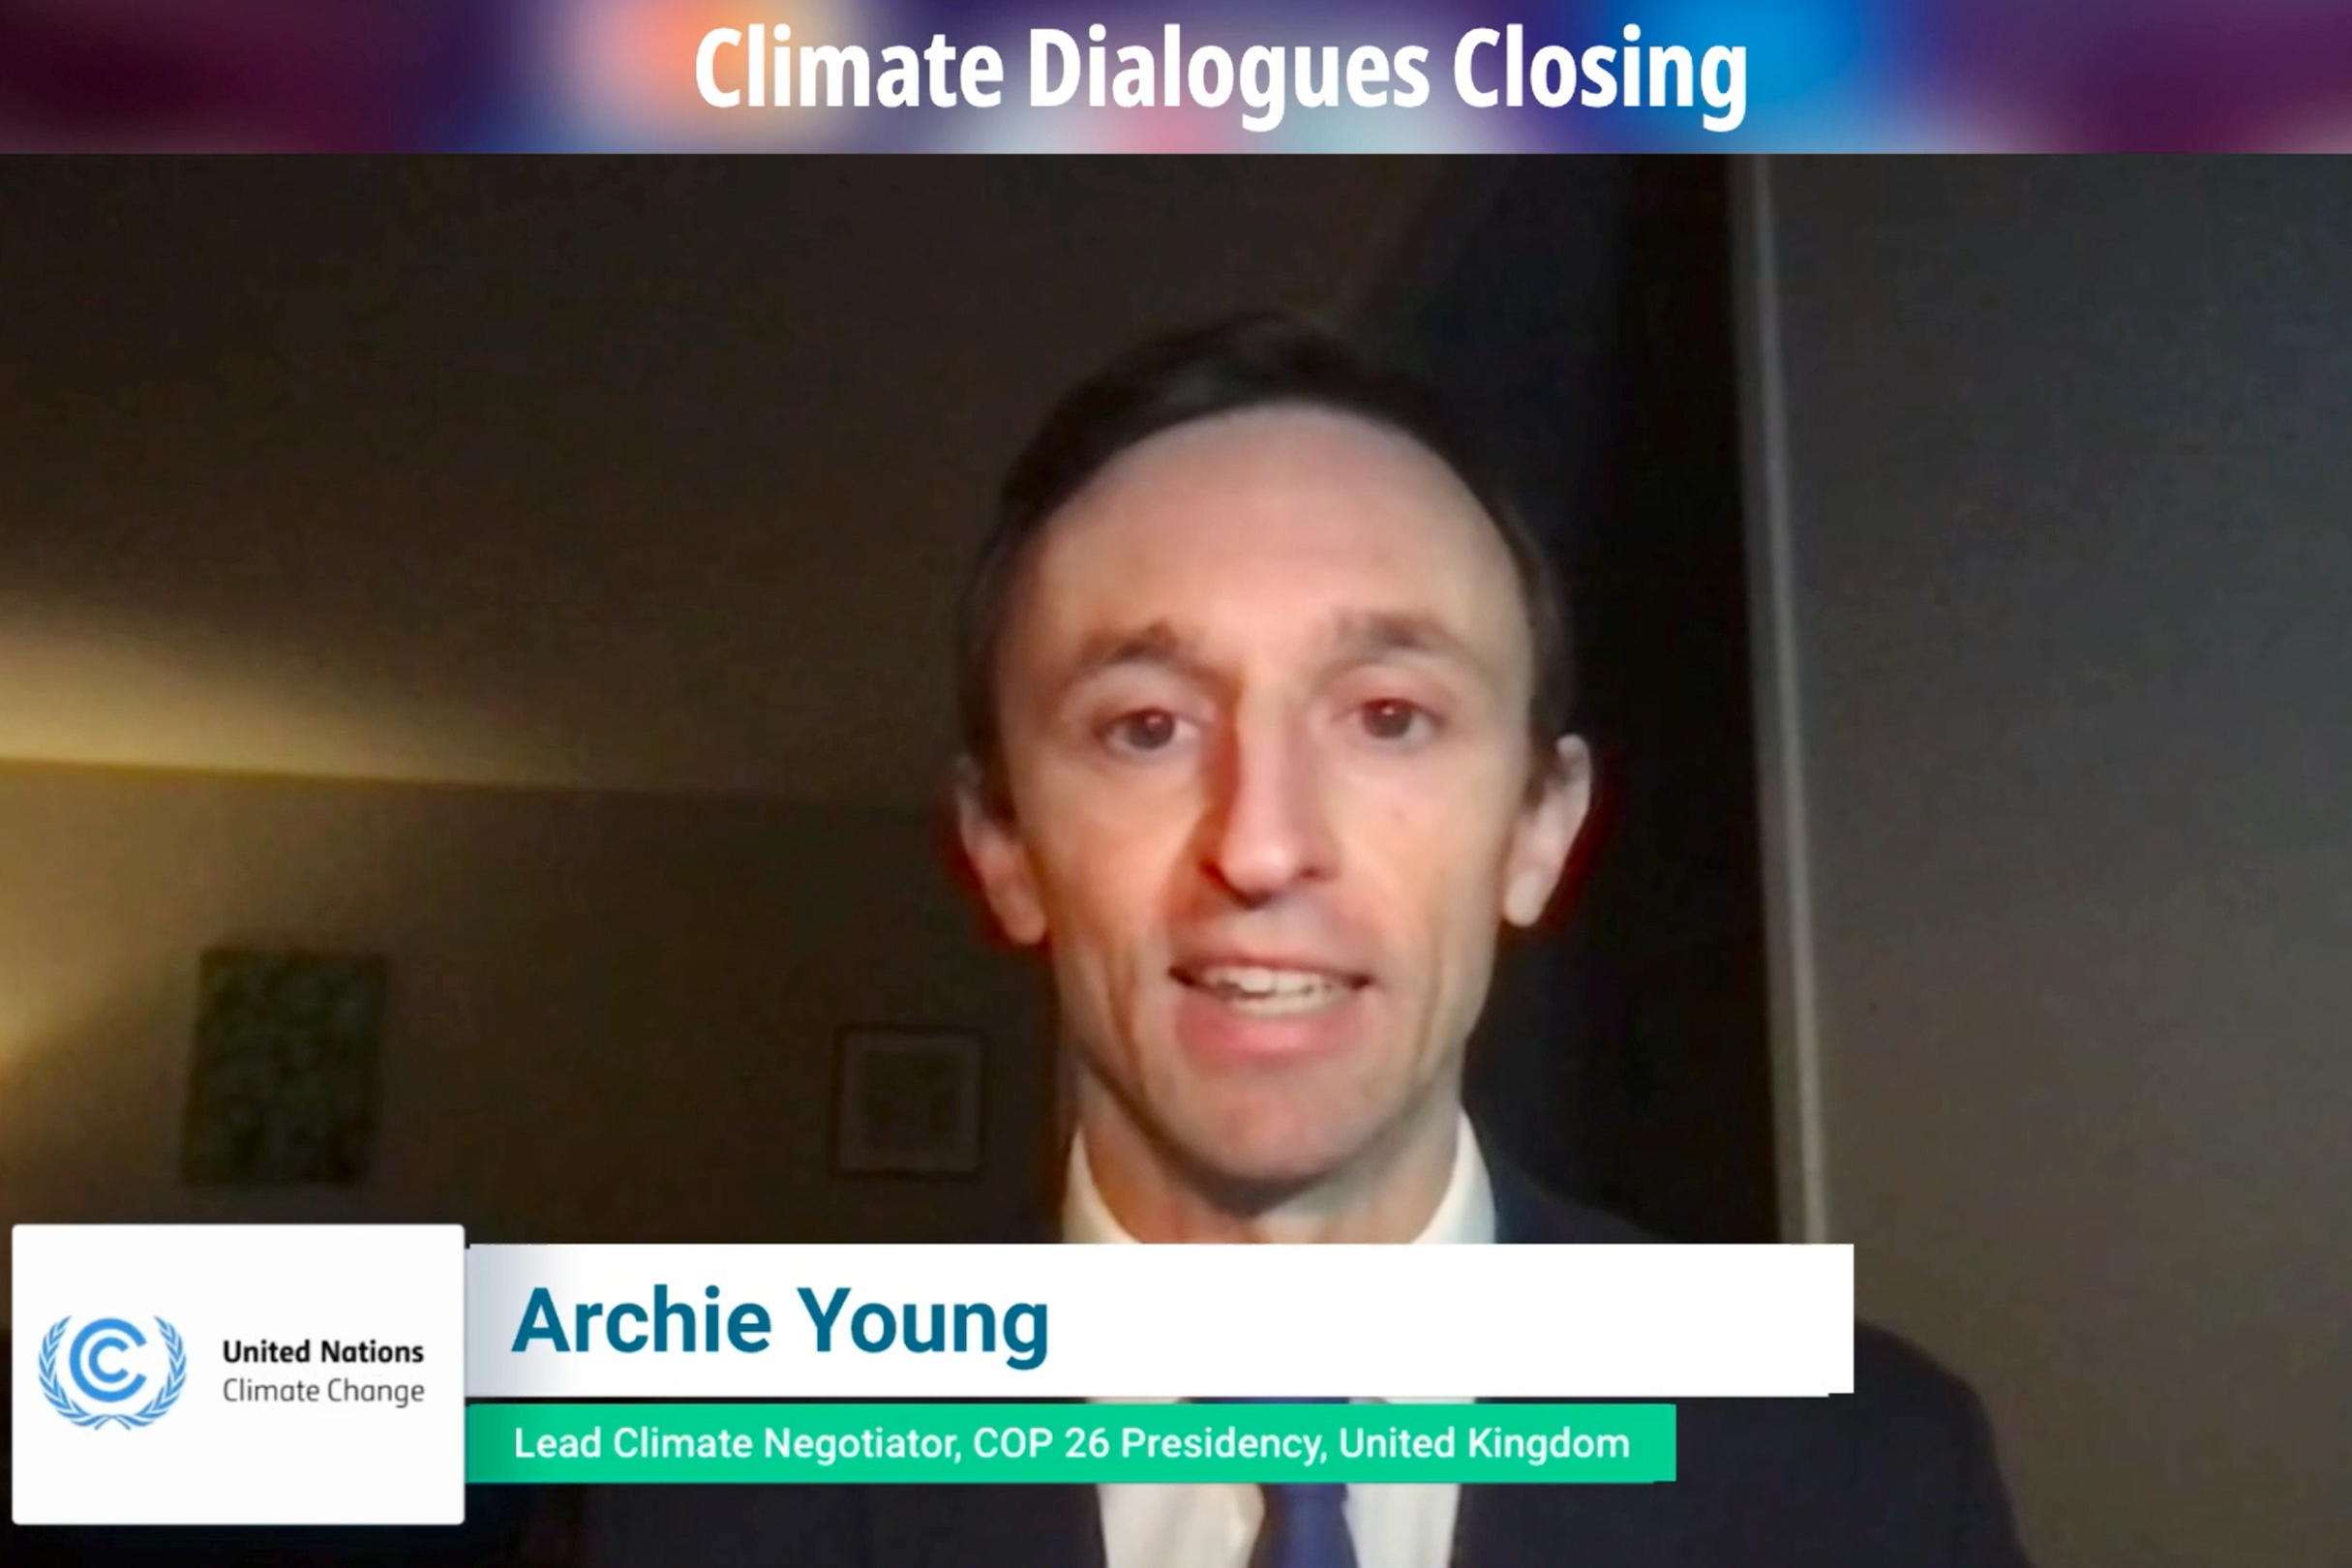 Archie Young, COP 26 Presidency